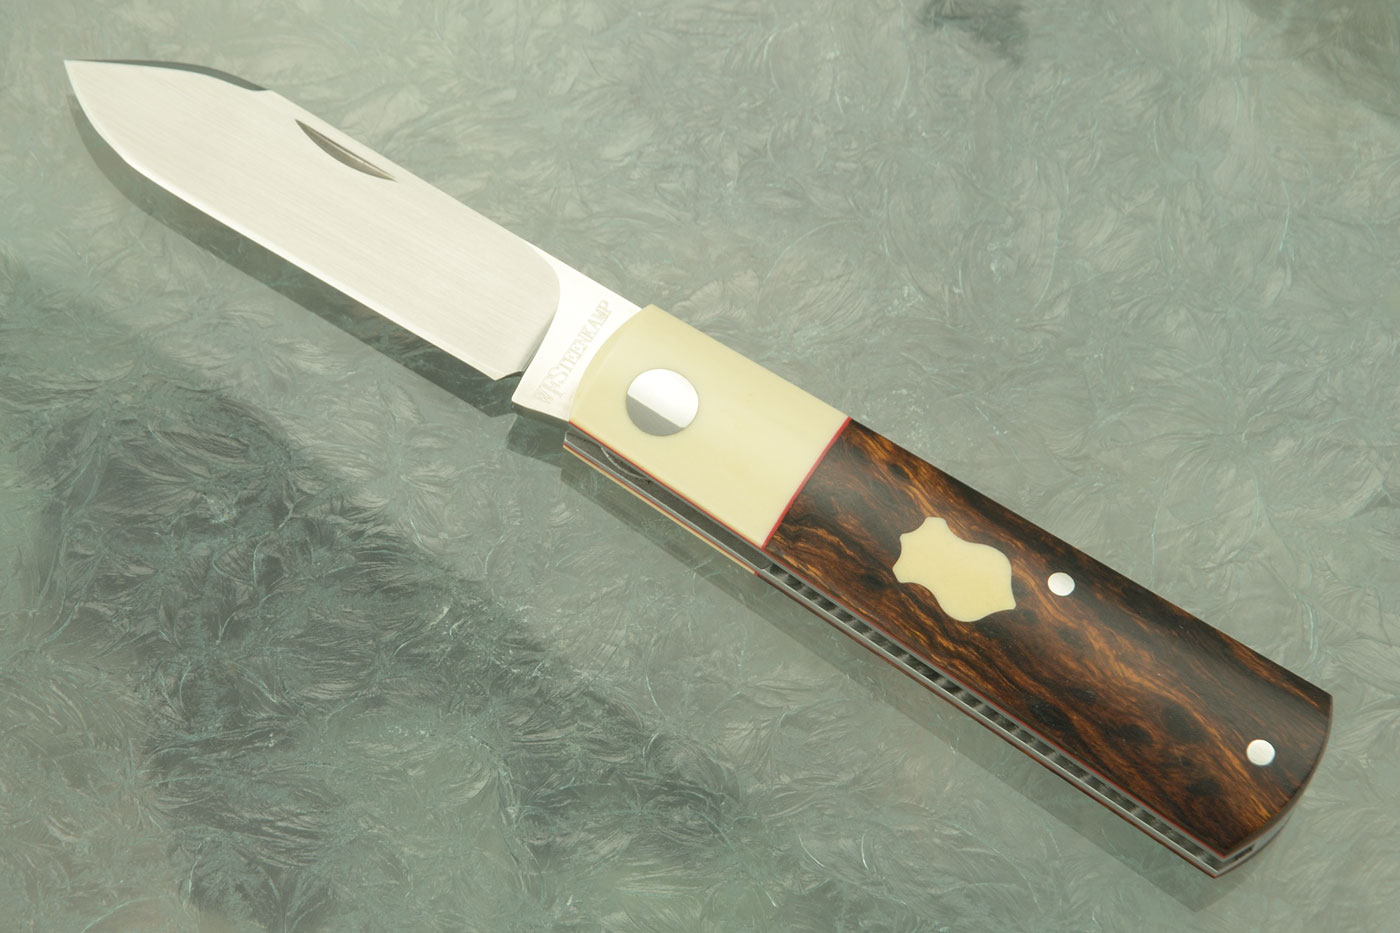 Barlow Slipjoint with Ironwood and Westinghouse Micarta